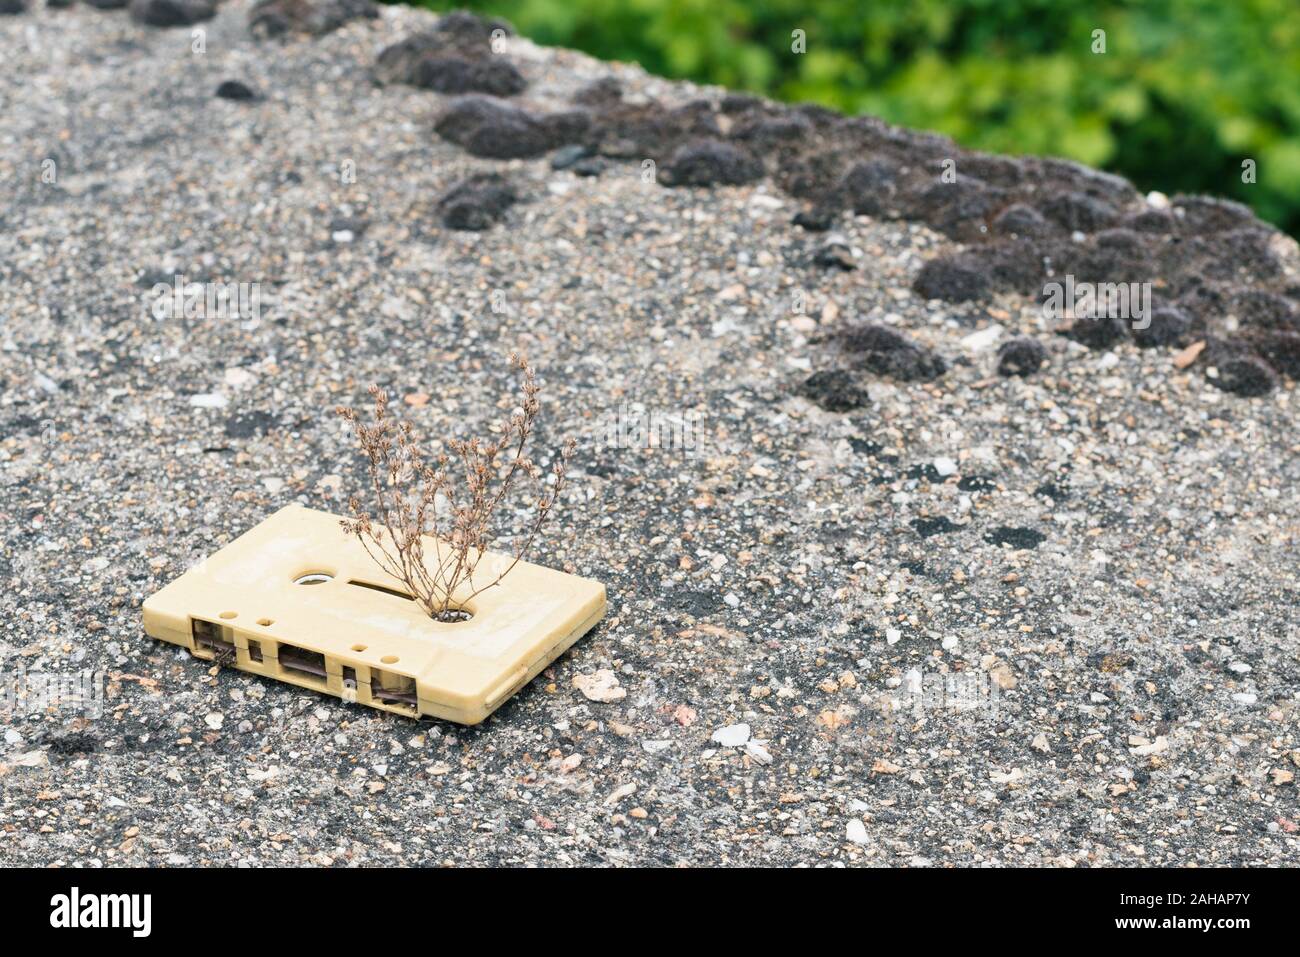 A cream vintage cassette tape from the 1980s era (obsolete music technology) with the grass grew through Stock Photo